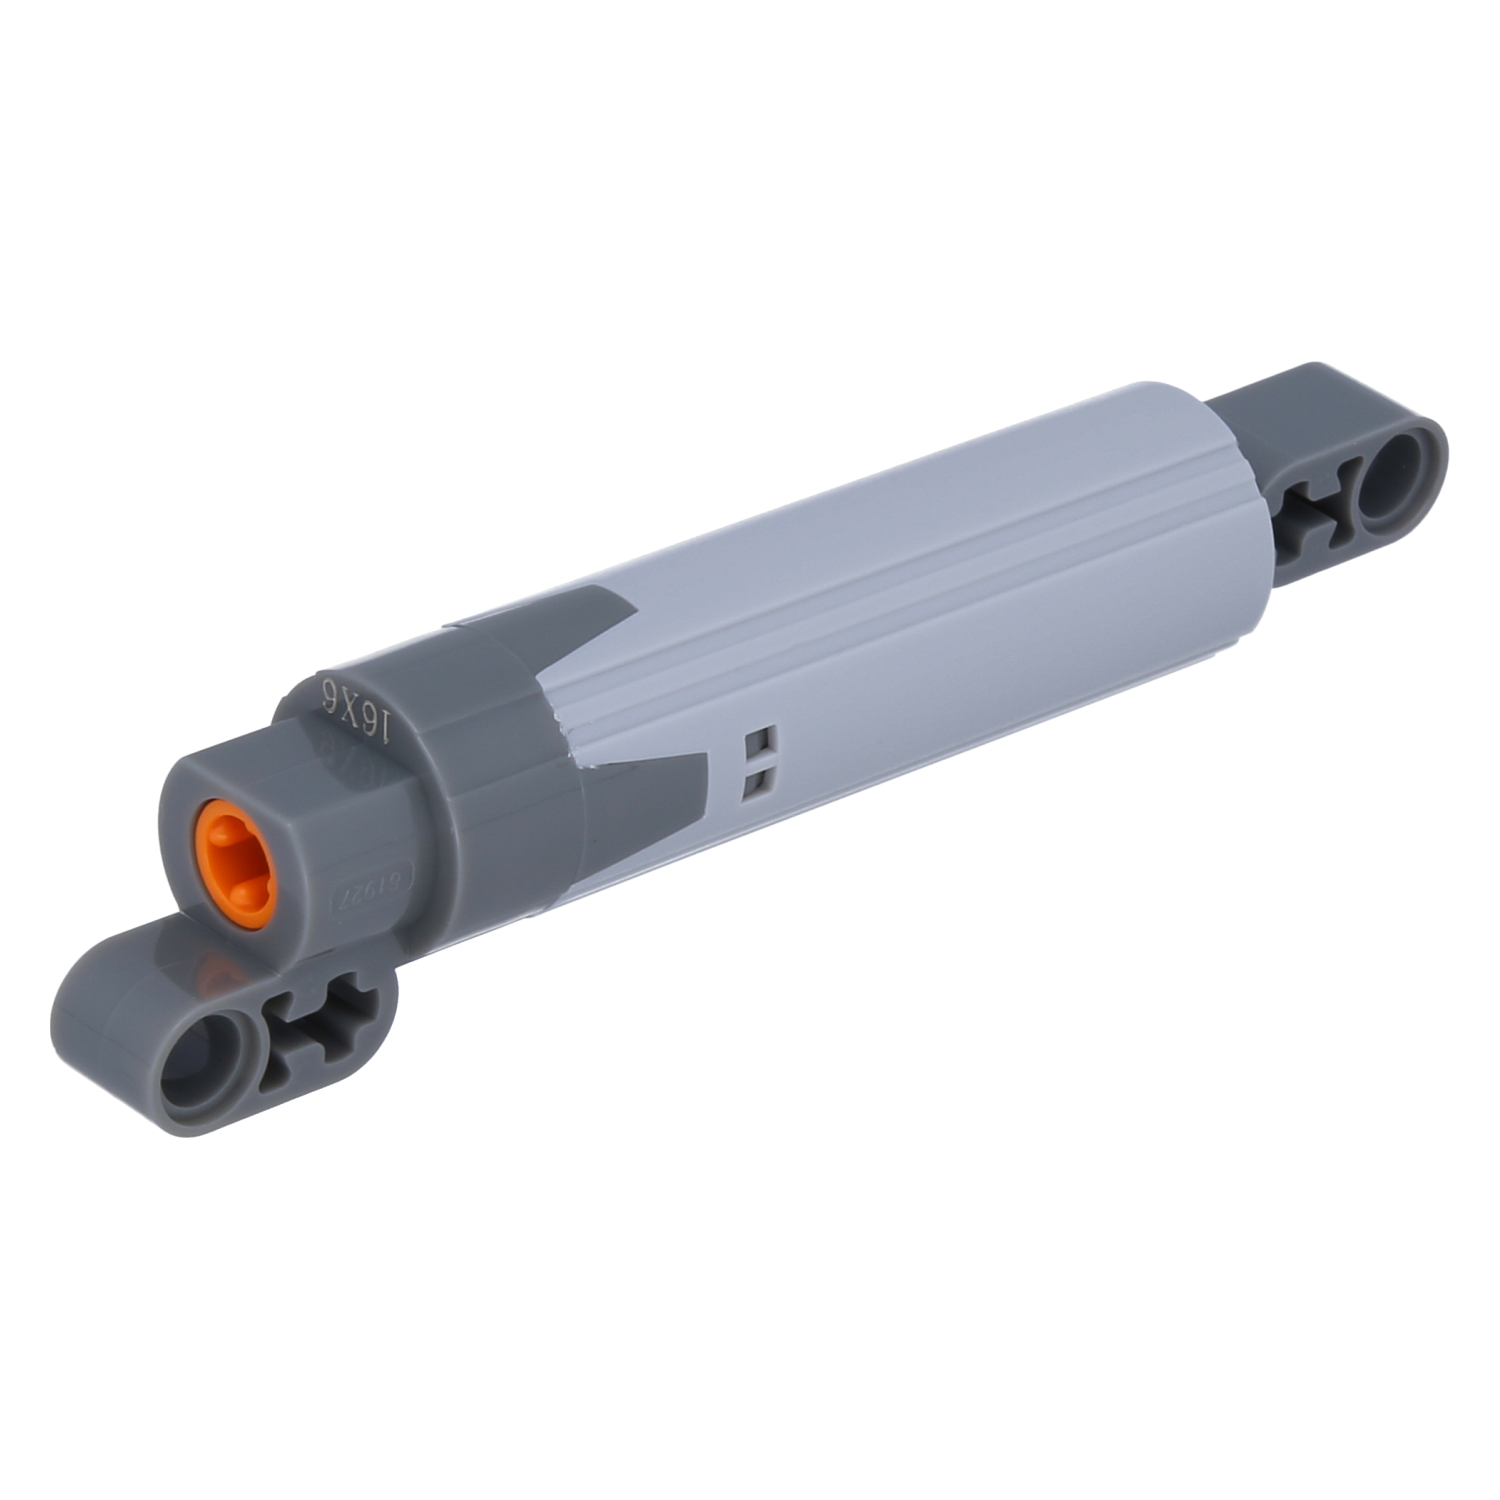 LEGO engines & actors - straight actuator with dark gray ends